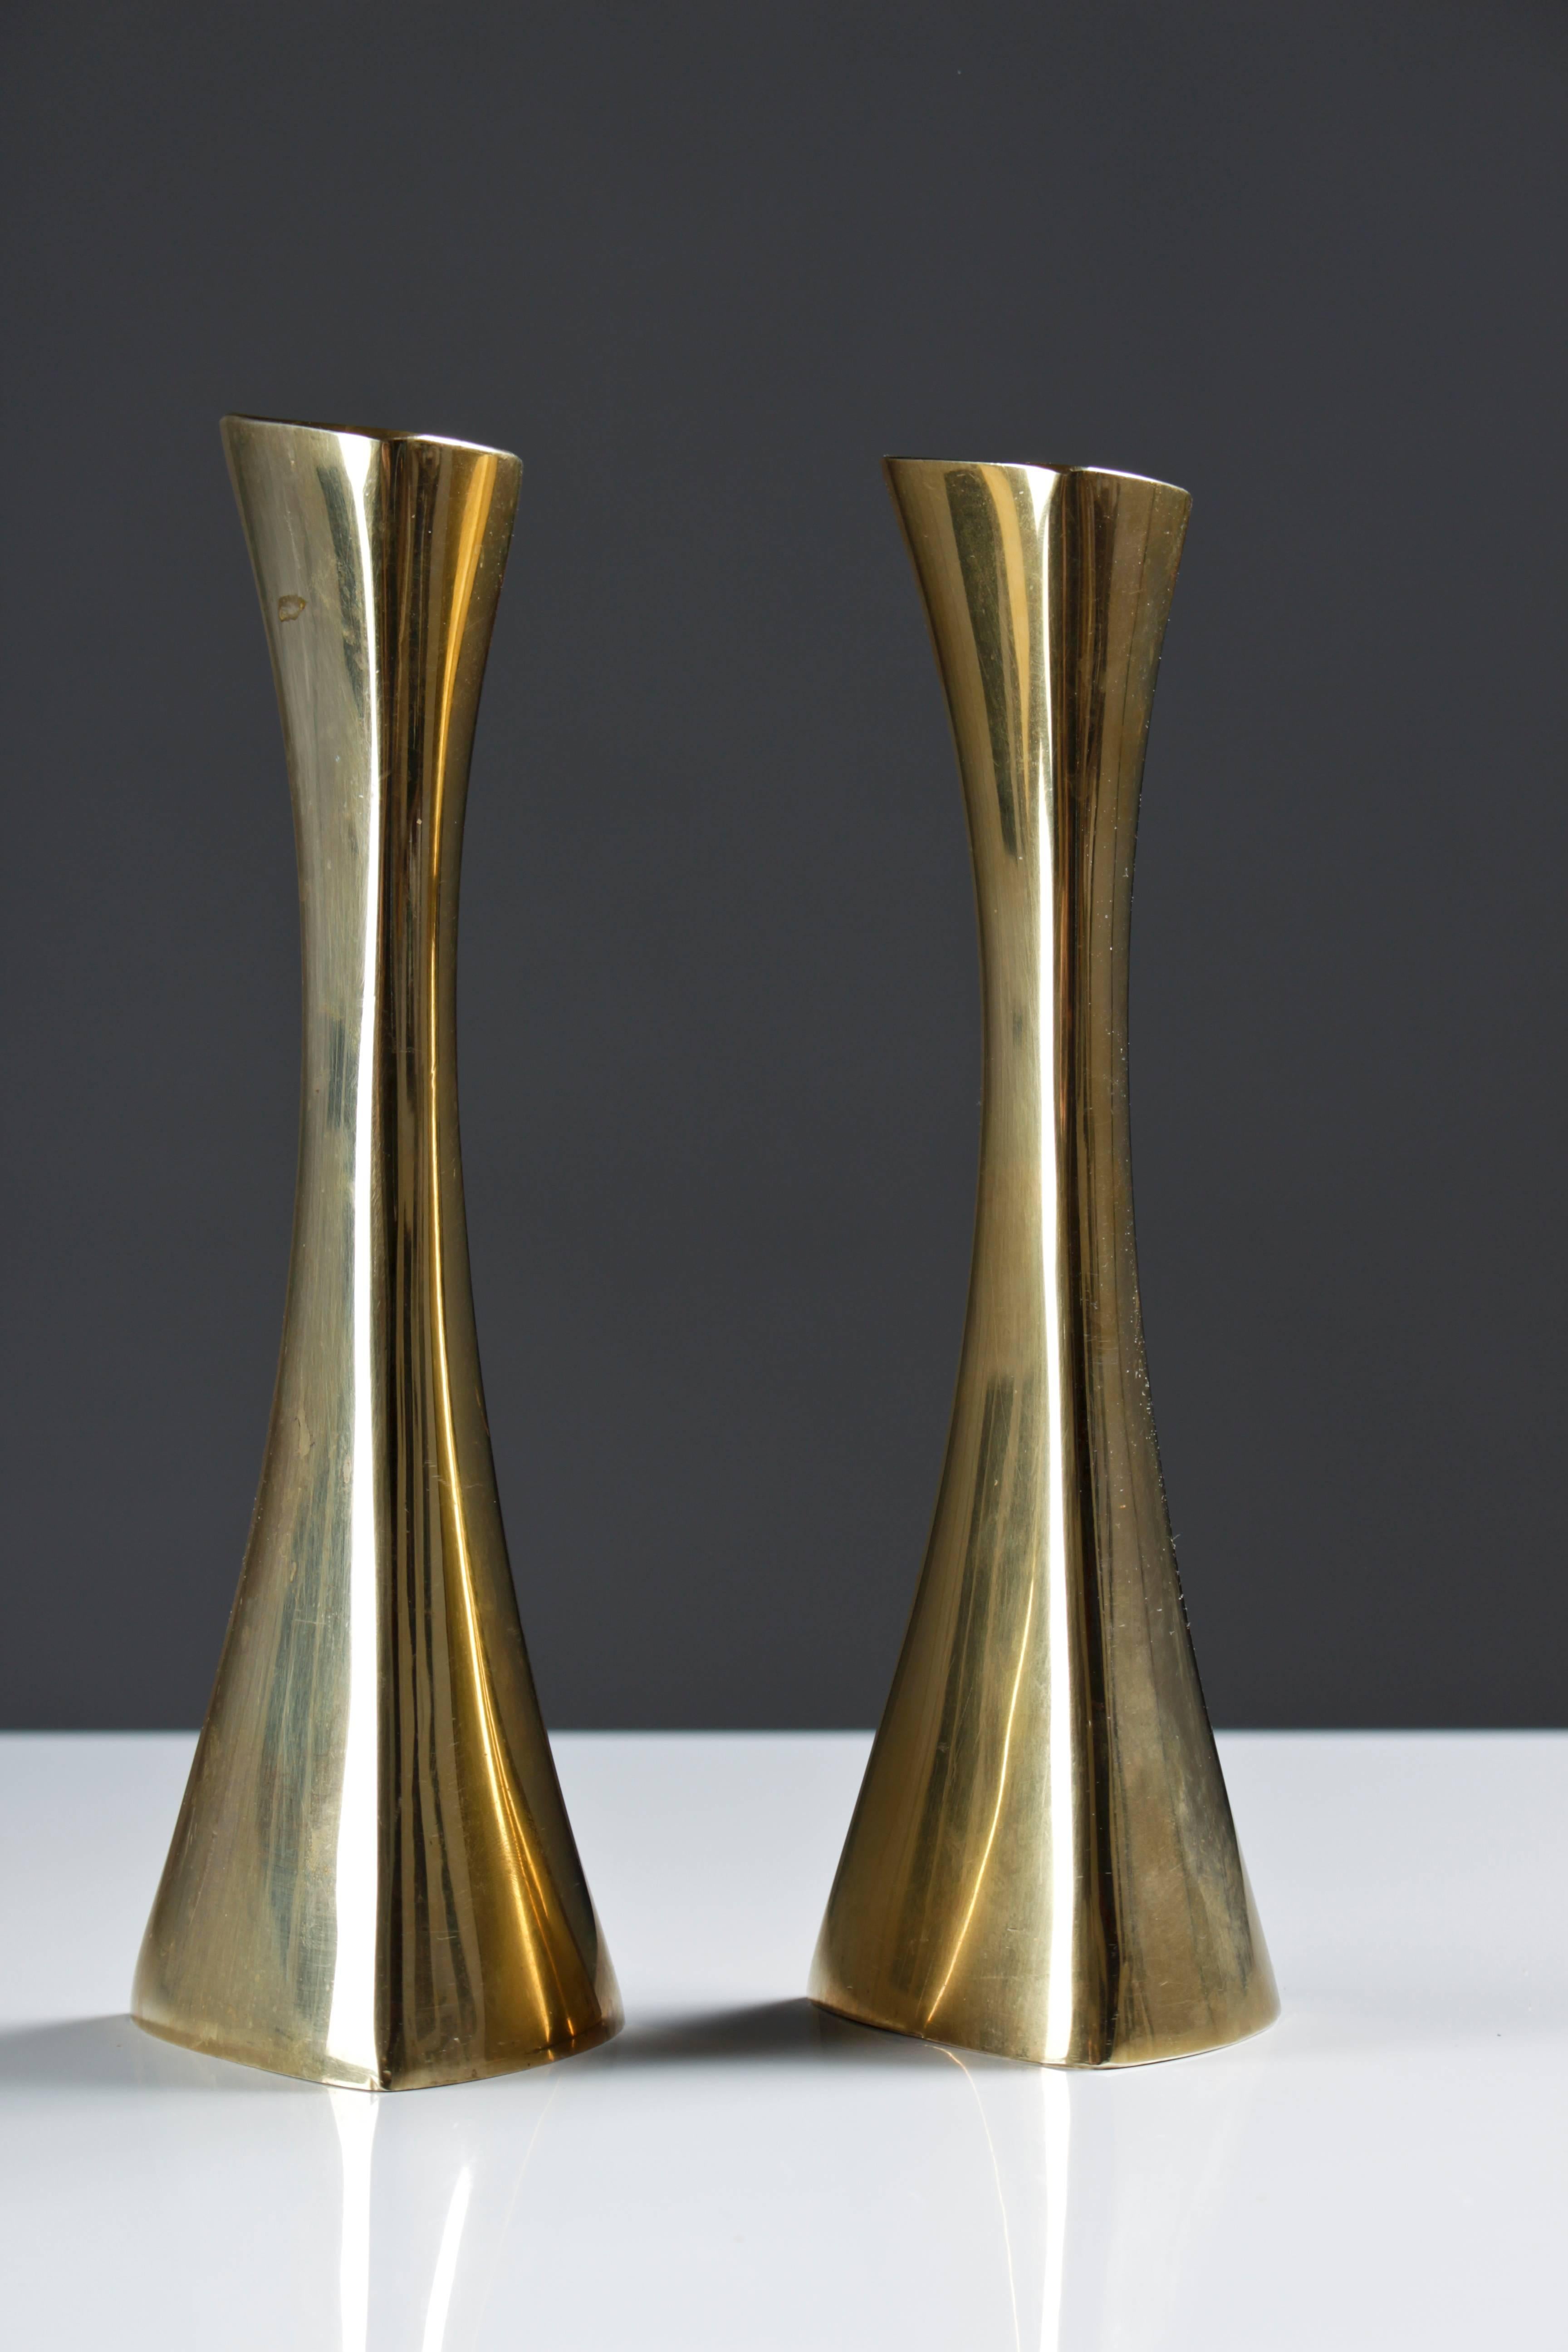 Beautiful, organic shaped candlesticks in brass by K-E Ytterberg for BCA Eskilstuna.
4 pieces avalable